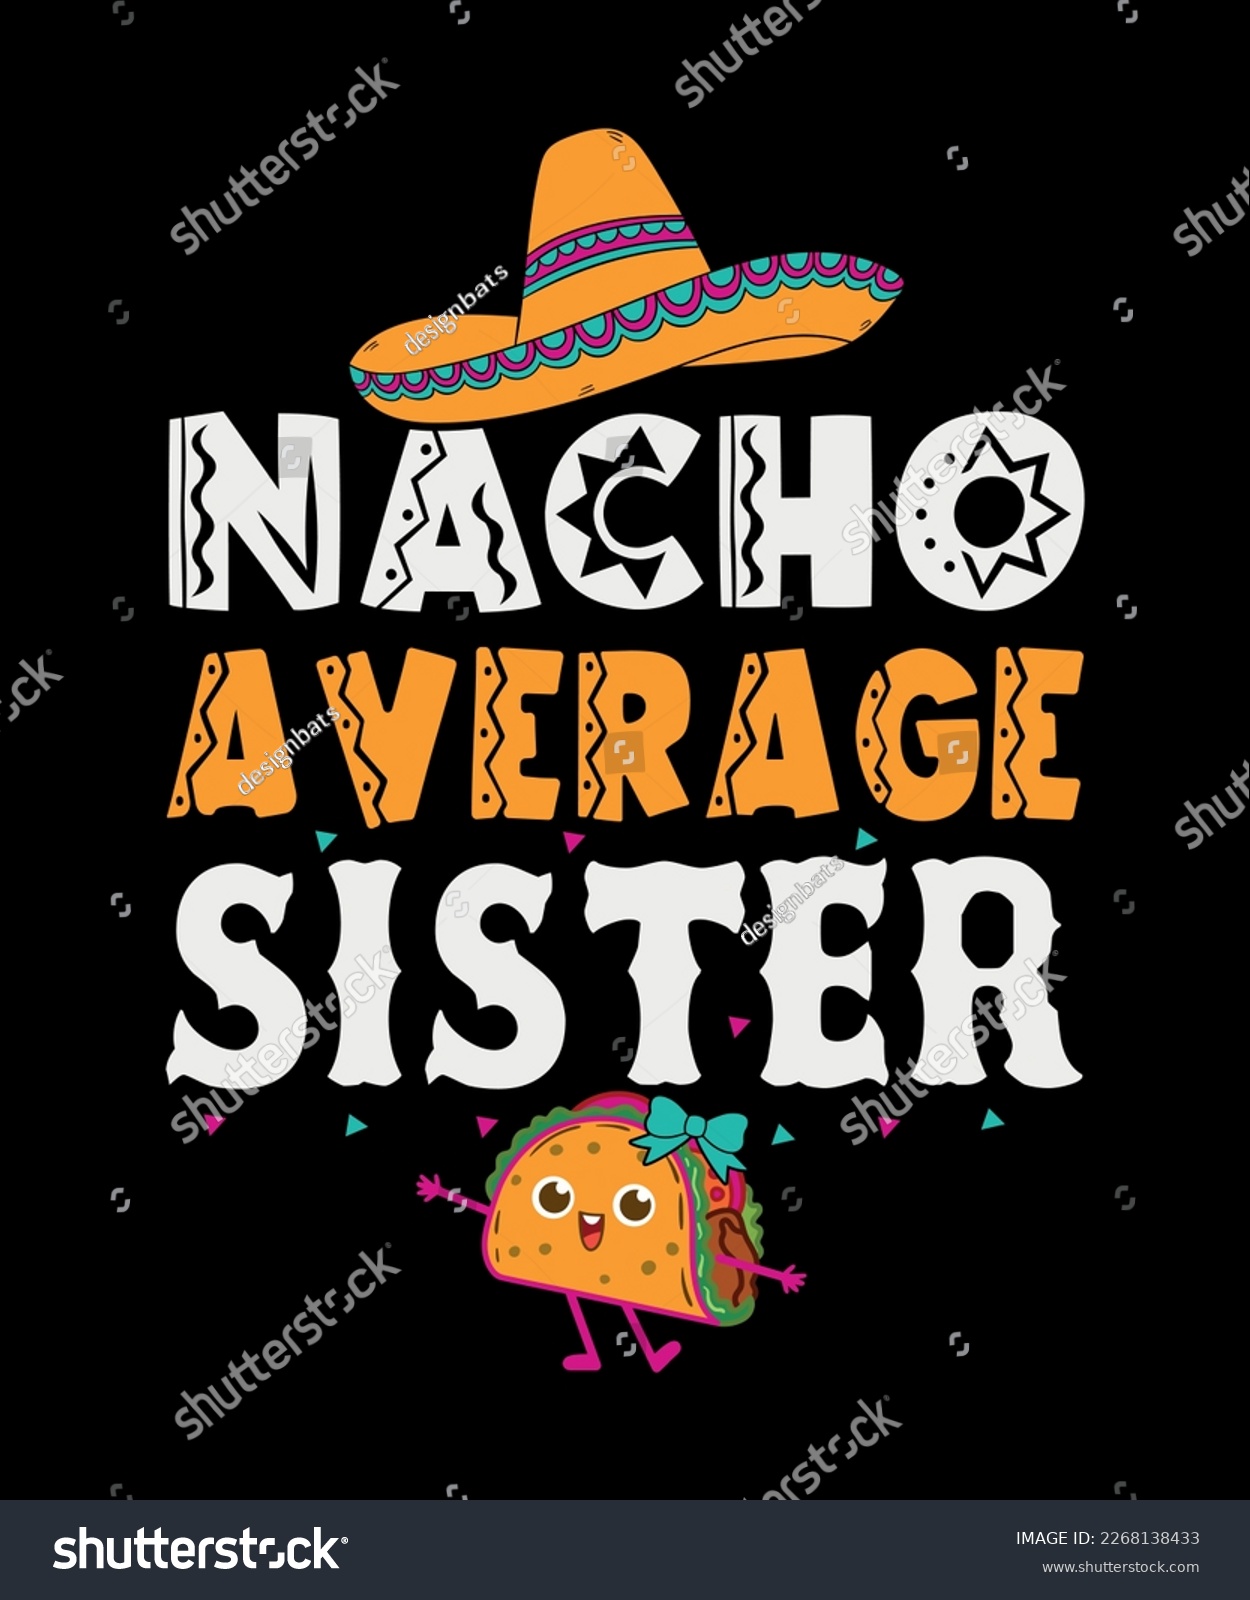 SVG of cinco de mayo t shirt design, mexican Vector design for poster, badge, emblem, art, element, isolated, Typography Funny fiesta concept for shirt, lavel, icon, card 4 svg